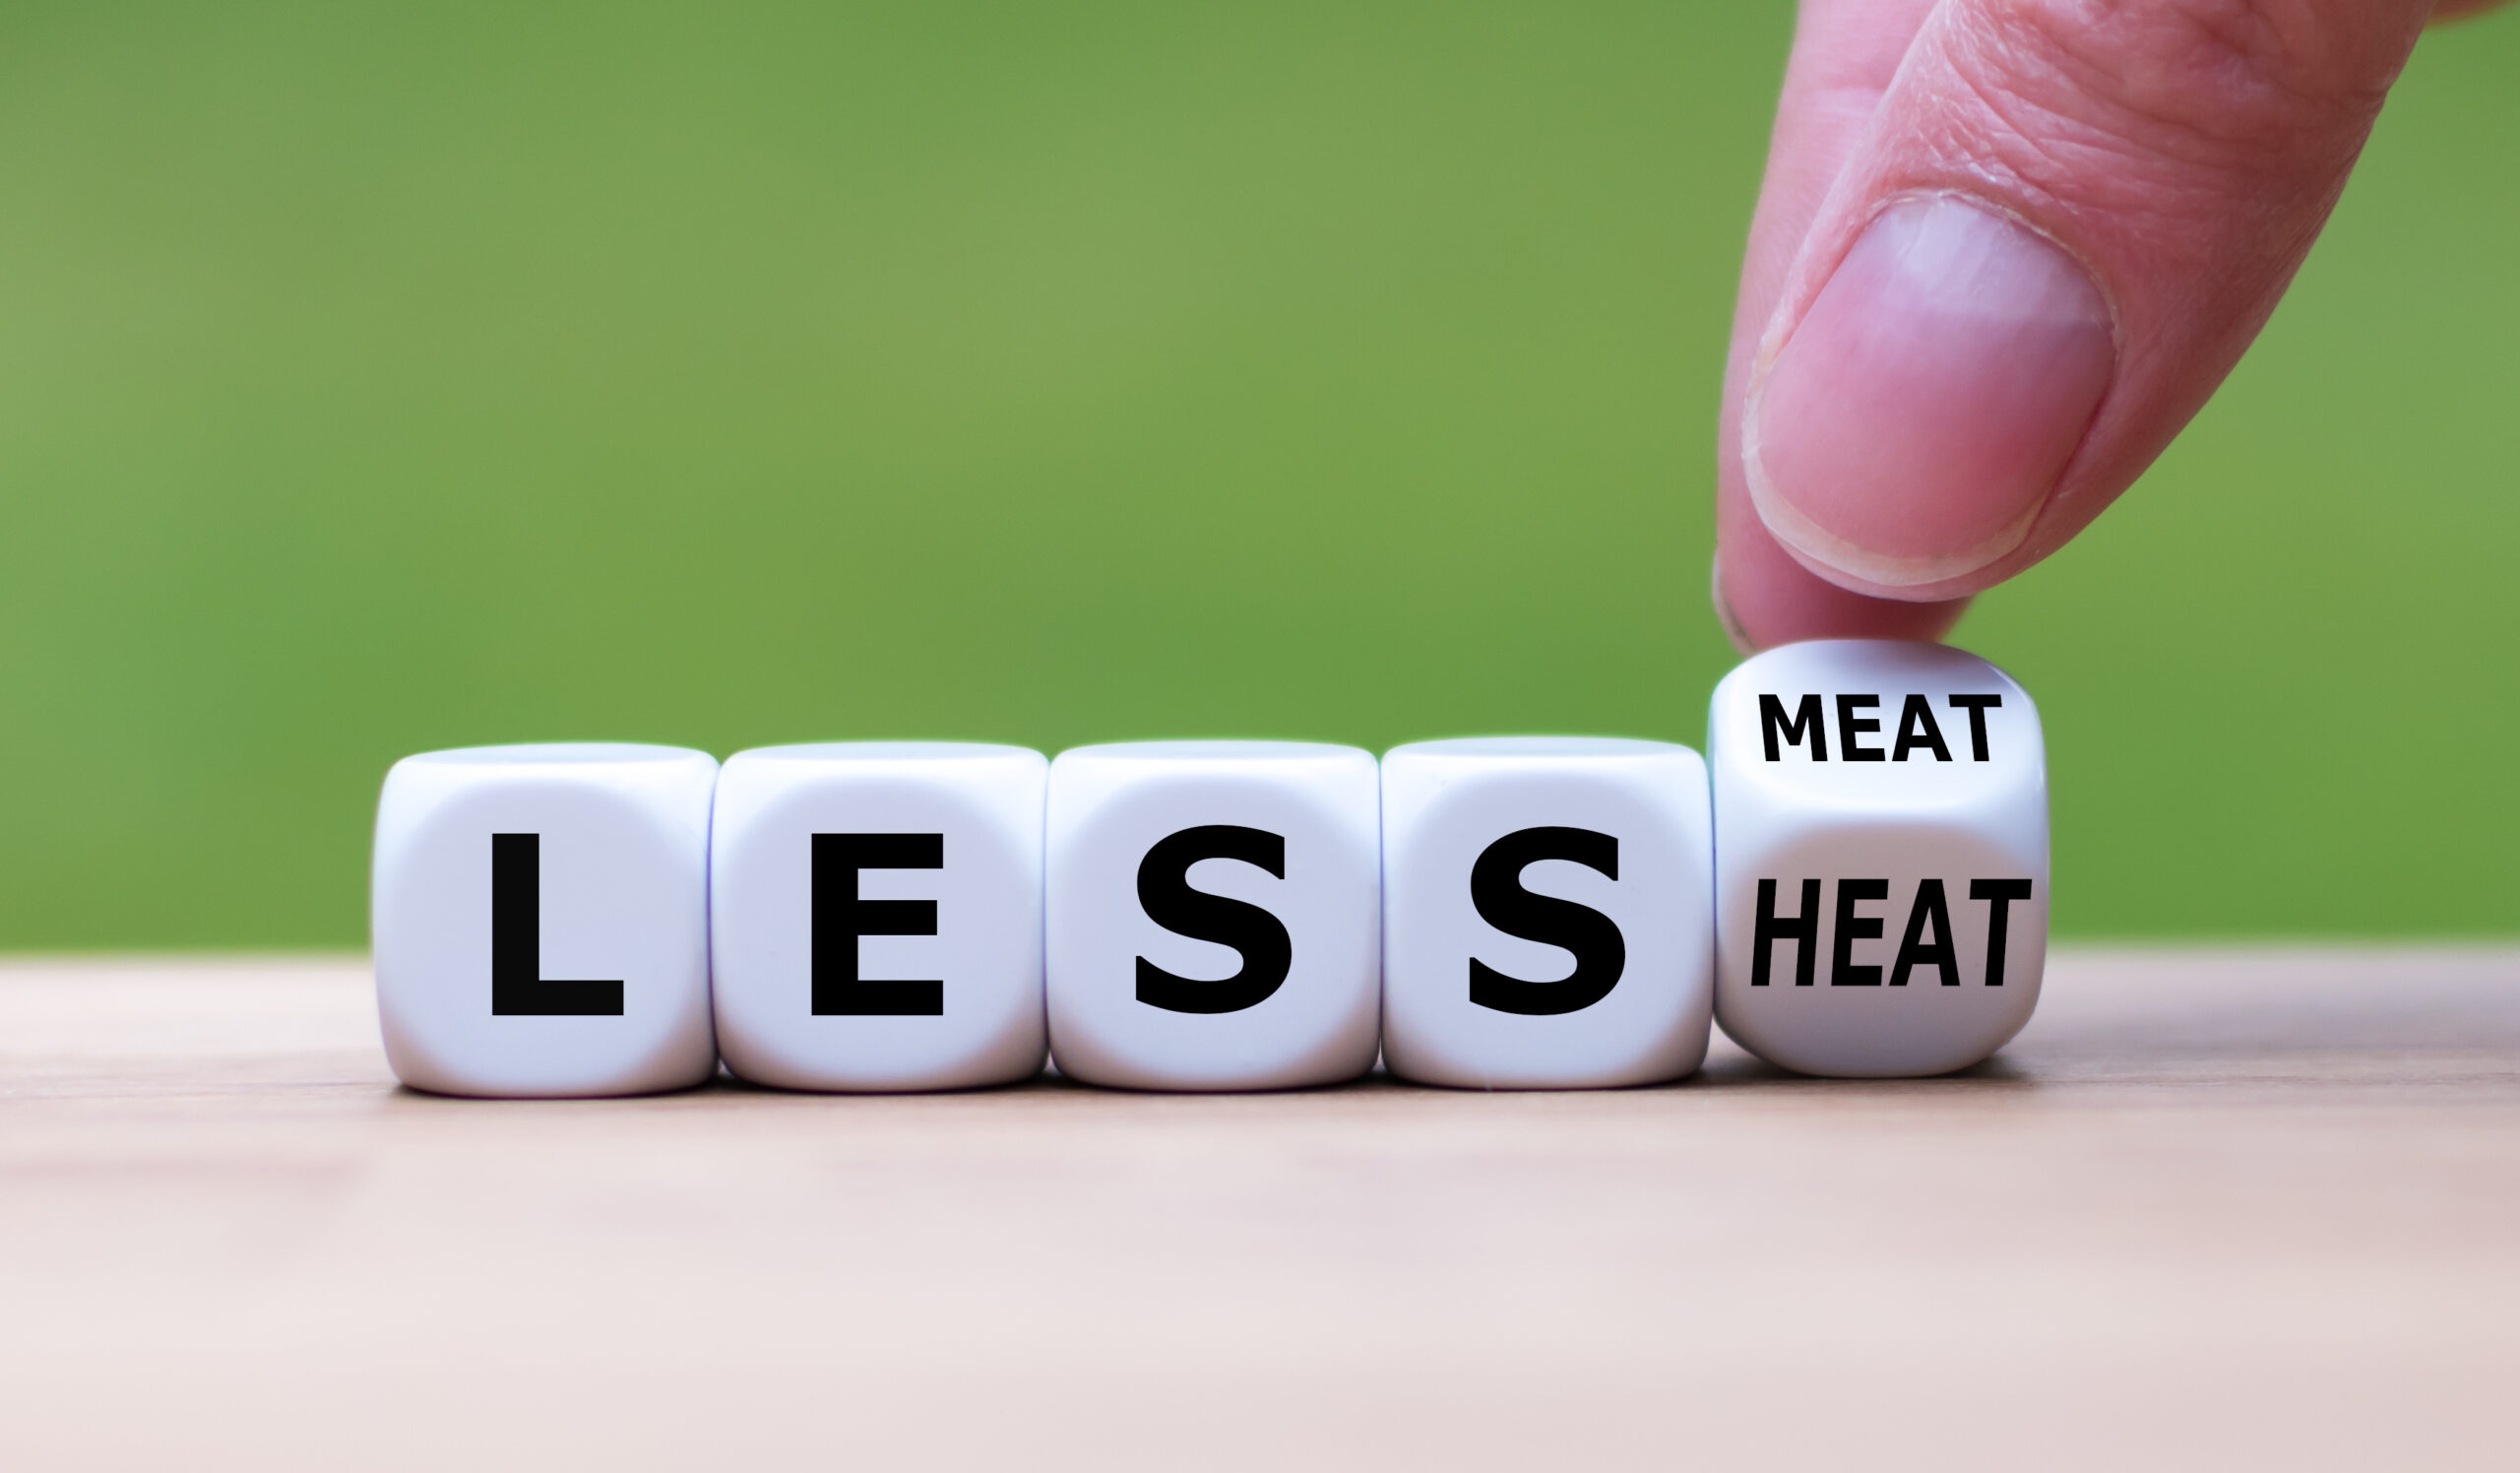 Symbol for eating less meat to save the planet. Hand turns a dice and changes the expression "less meat" to "less heat".